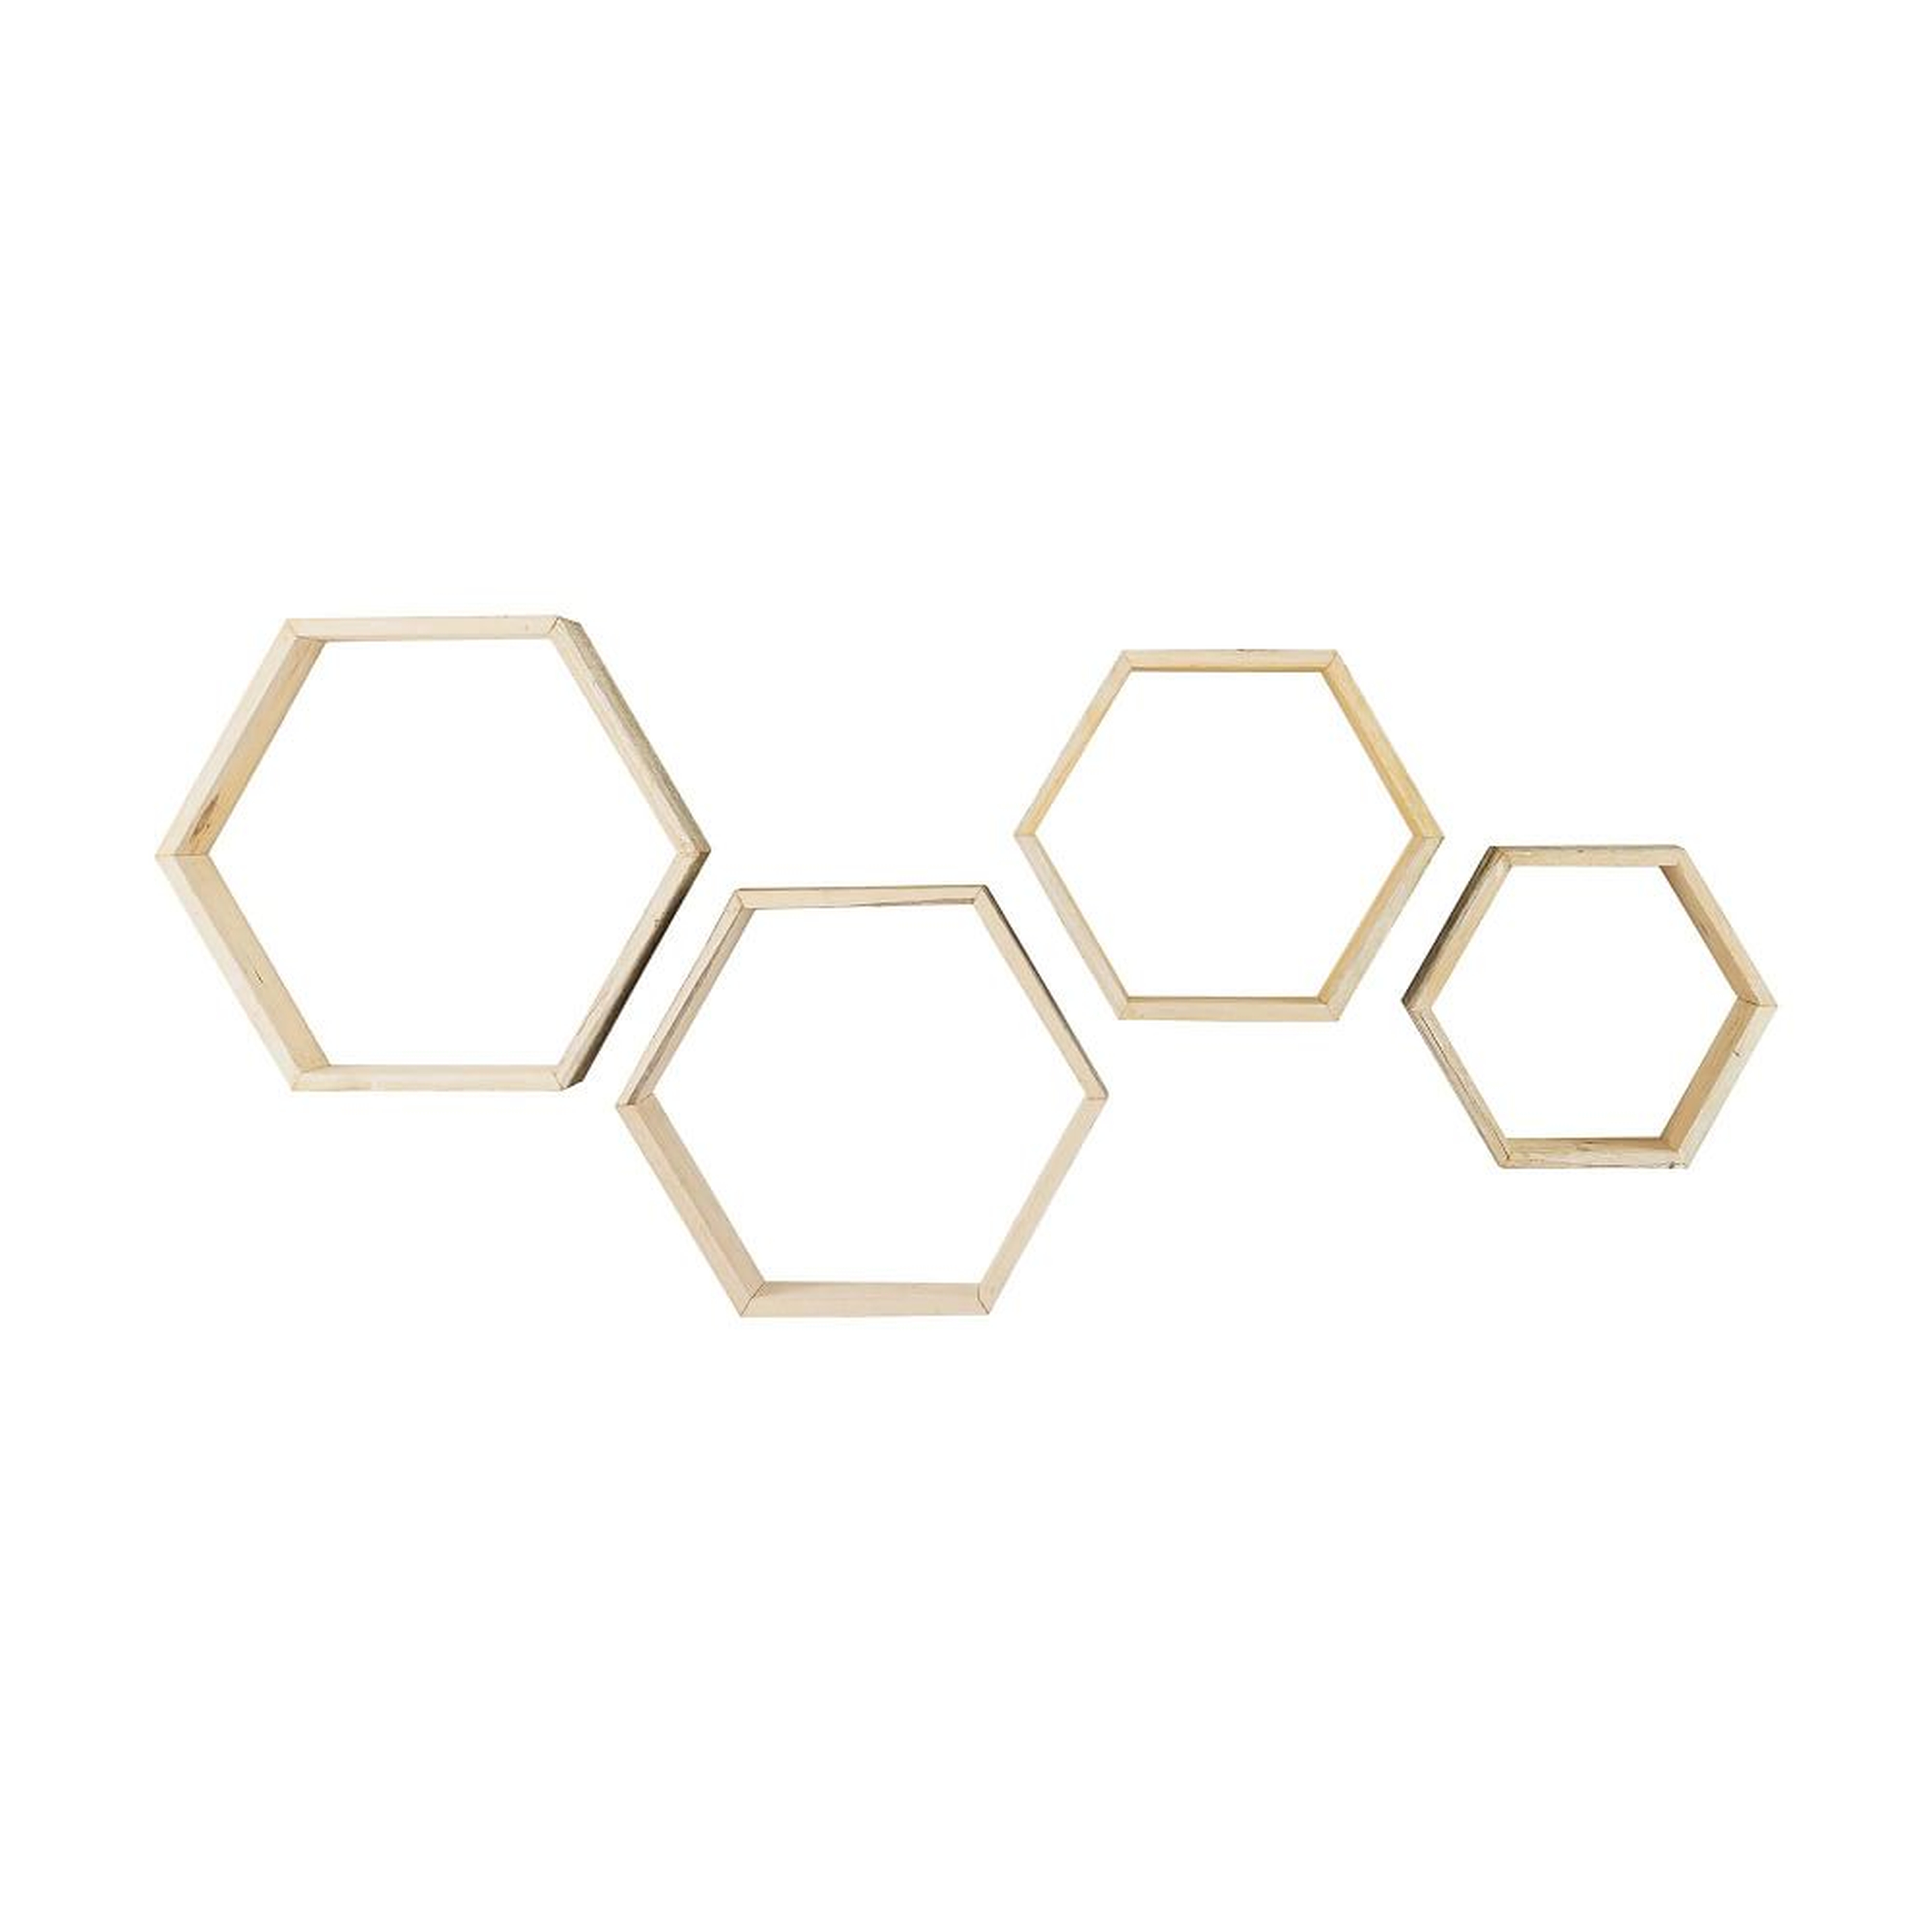 Recycled Wood Hexagon Wall Shelves, Whitewash, Set of 4 - West Elm